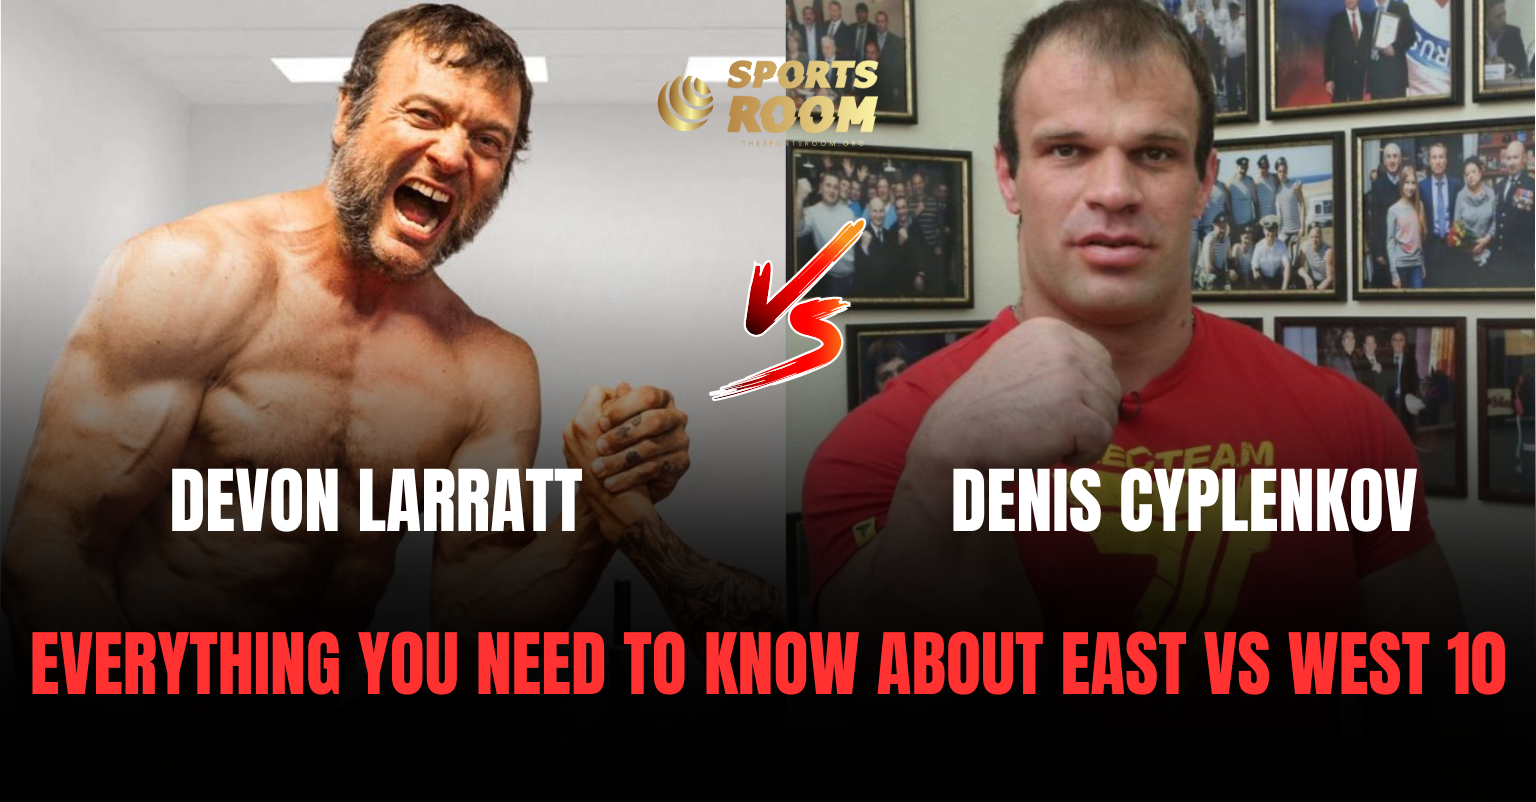 East Vs West 10: Everything You Need To Know About Denis Cyplenkov vs Devon Larratt Matchup